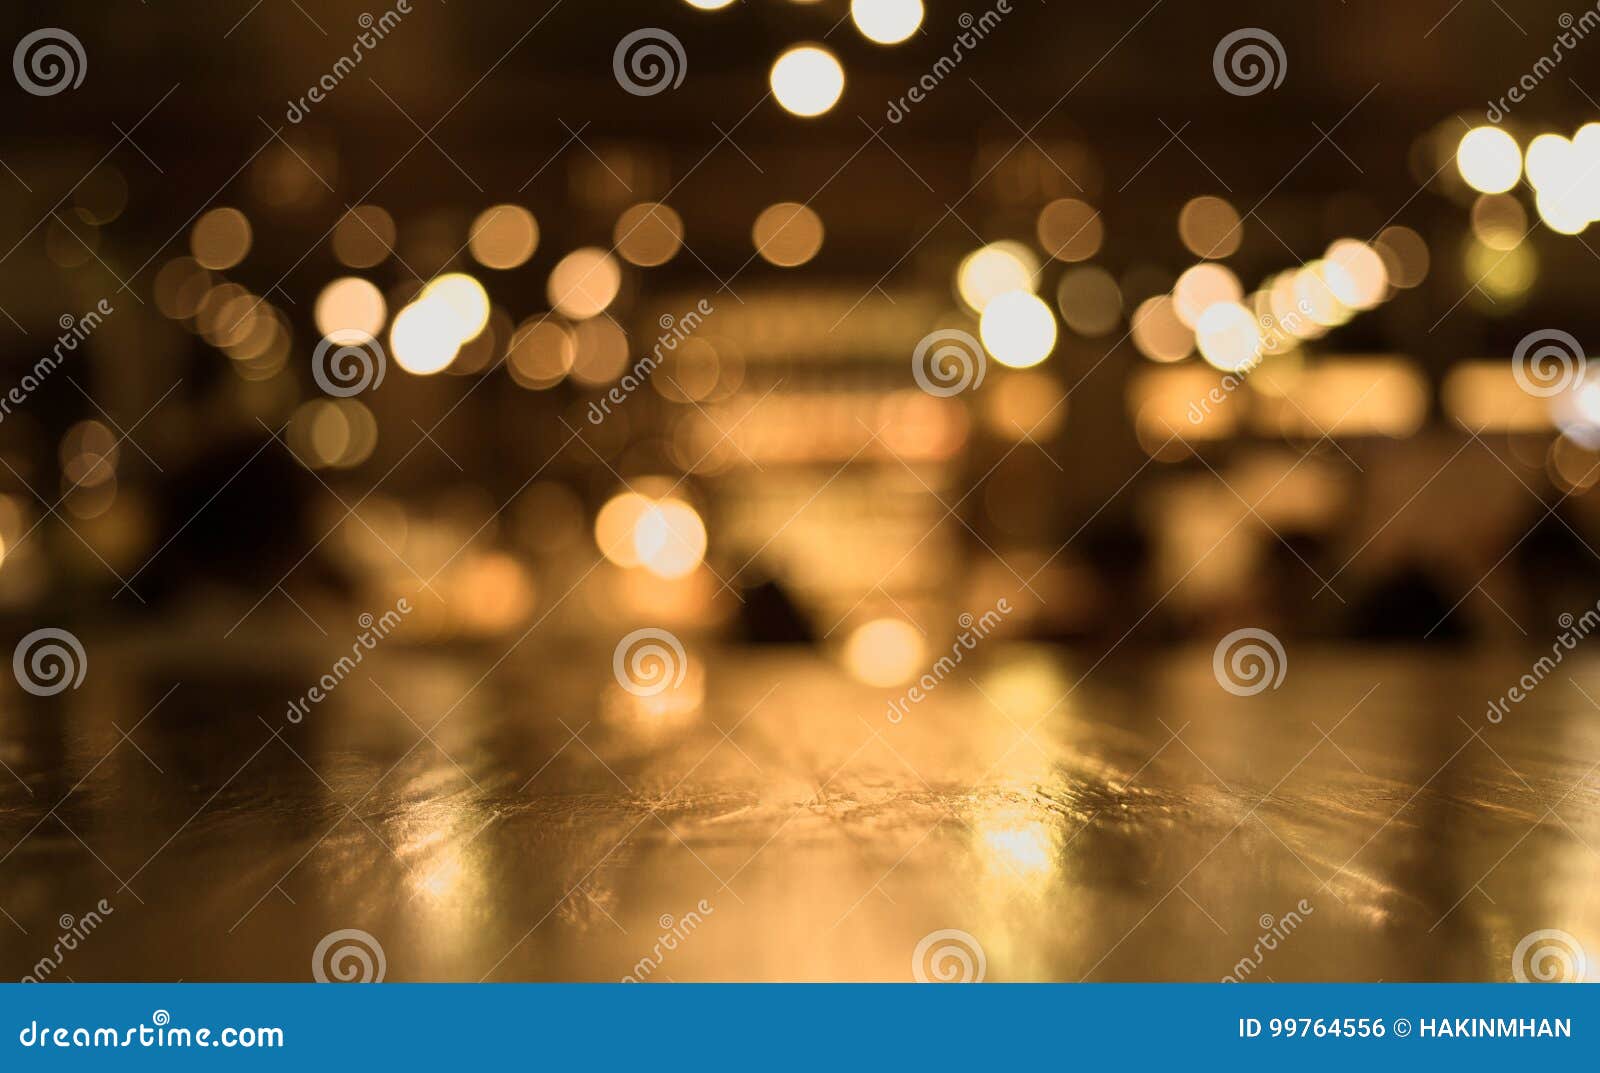 wood table top with reflect on blur of lighting in cafe,restaurant